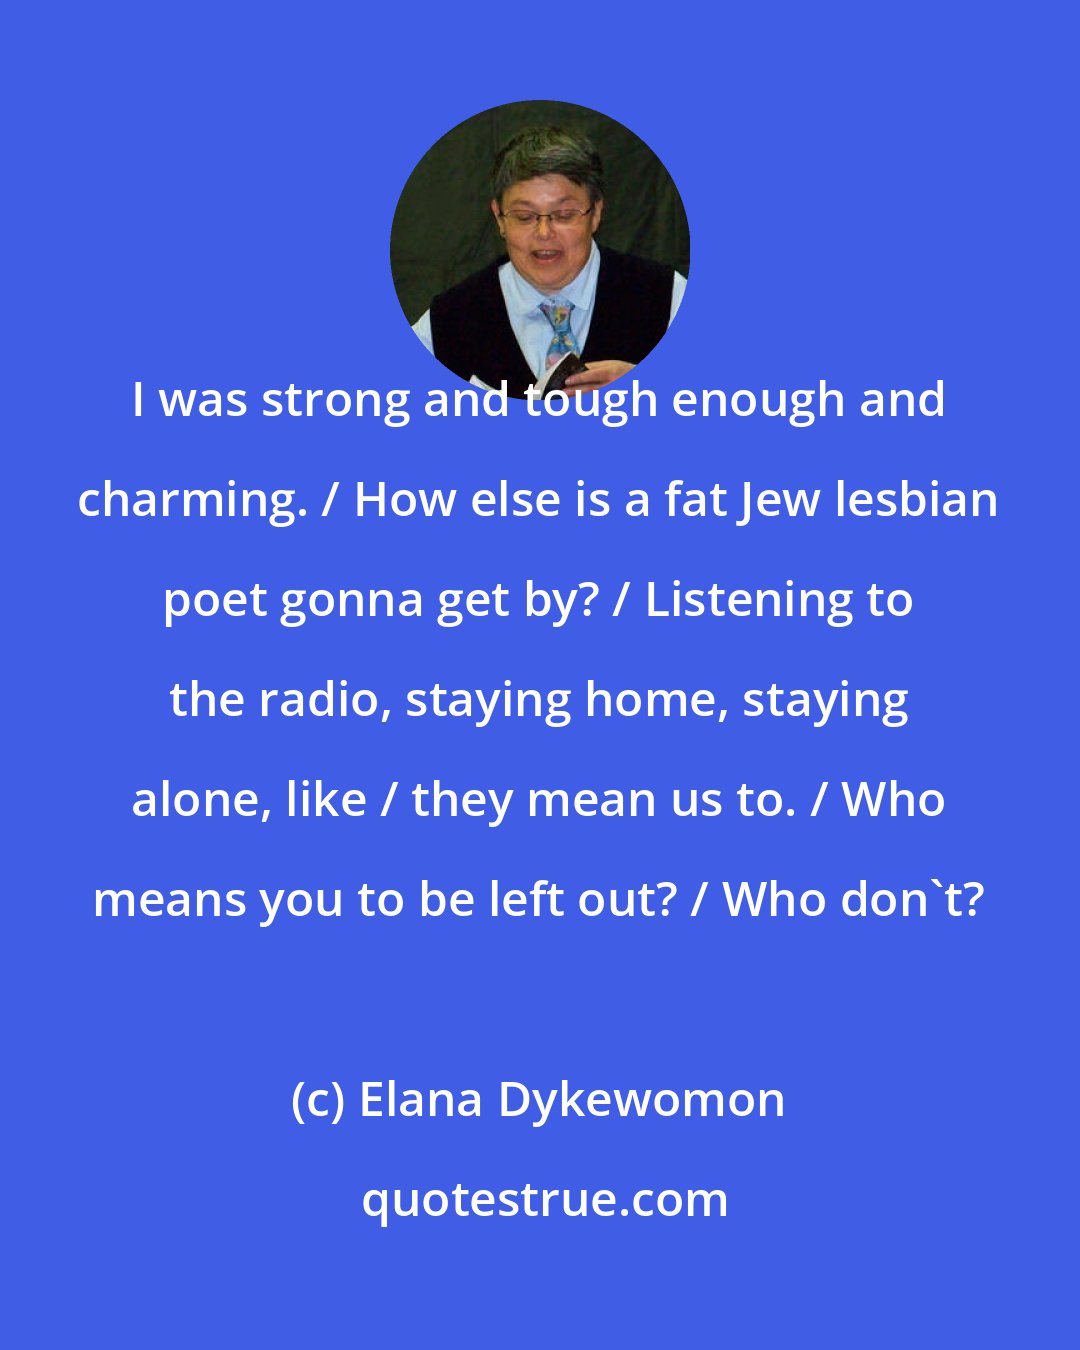 Elana Dykewomon: I was strong and tough enough and charming. / How else is a fat Jew lesbian poet gonna get by? / Listening to the radio, staying home, staying alone, like / they mean us to. / Who means you to be left out? / Who don't?